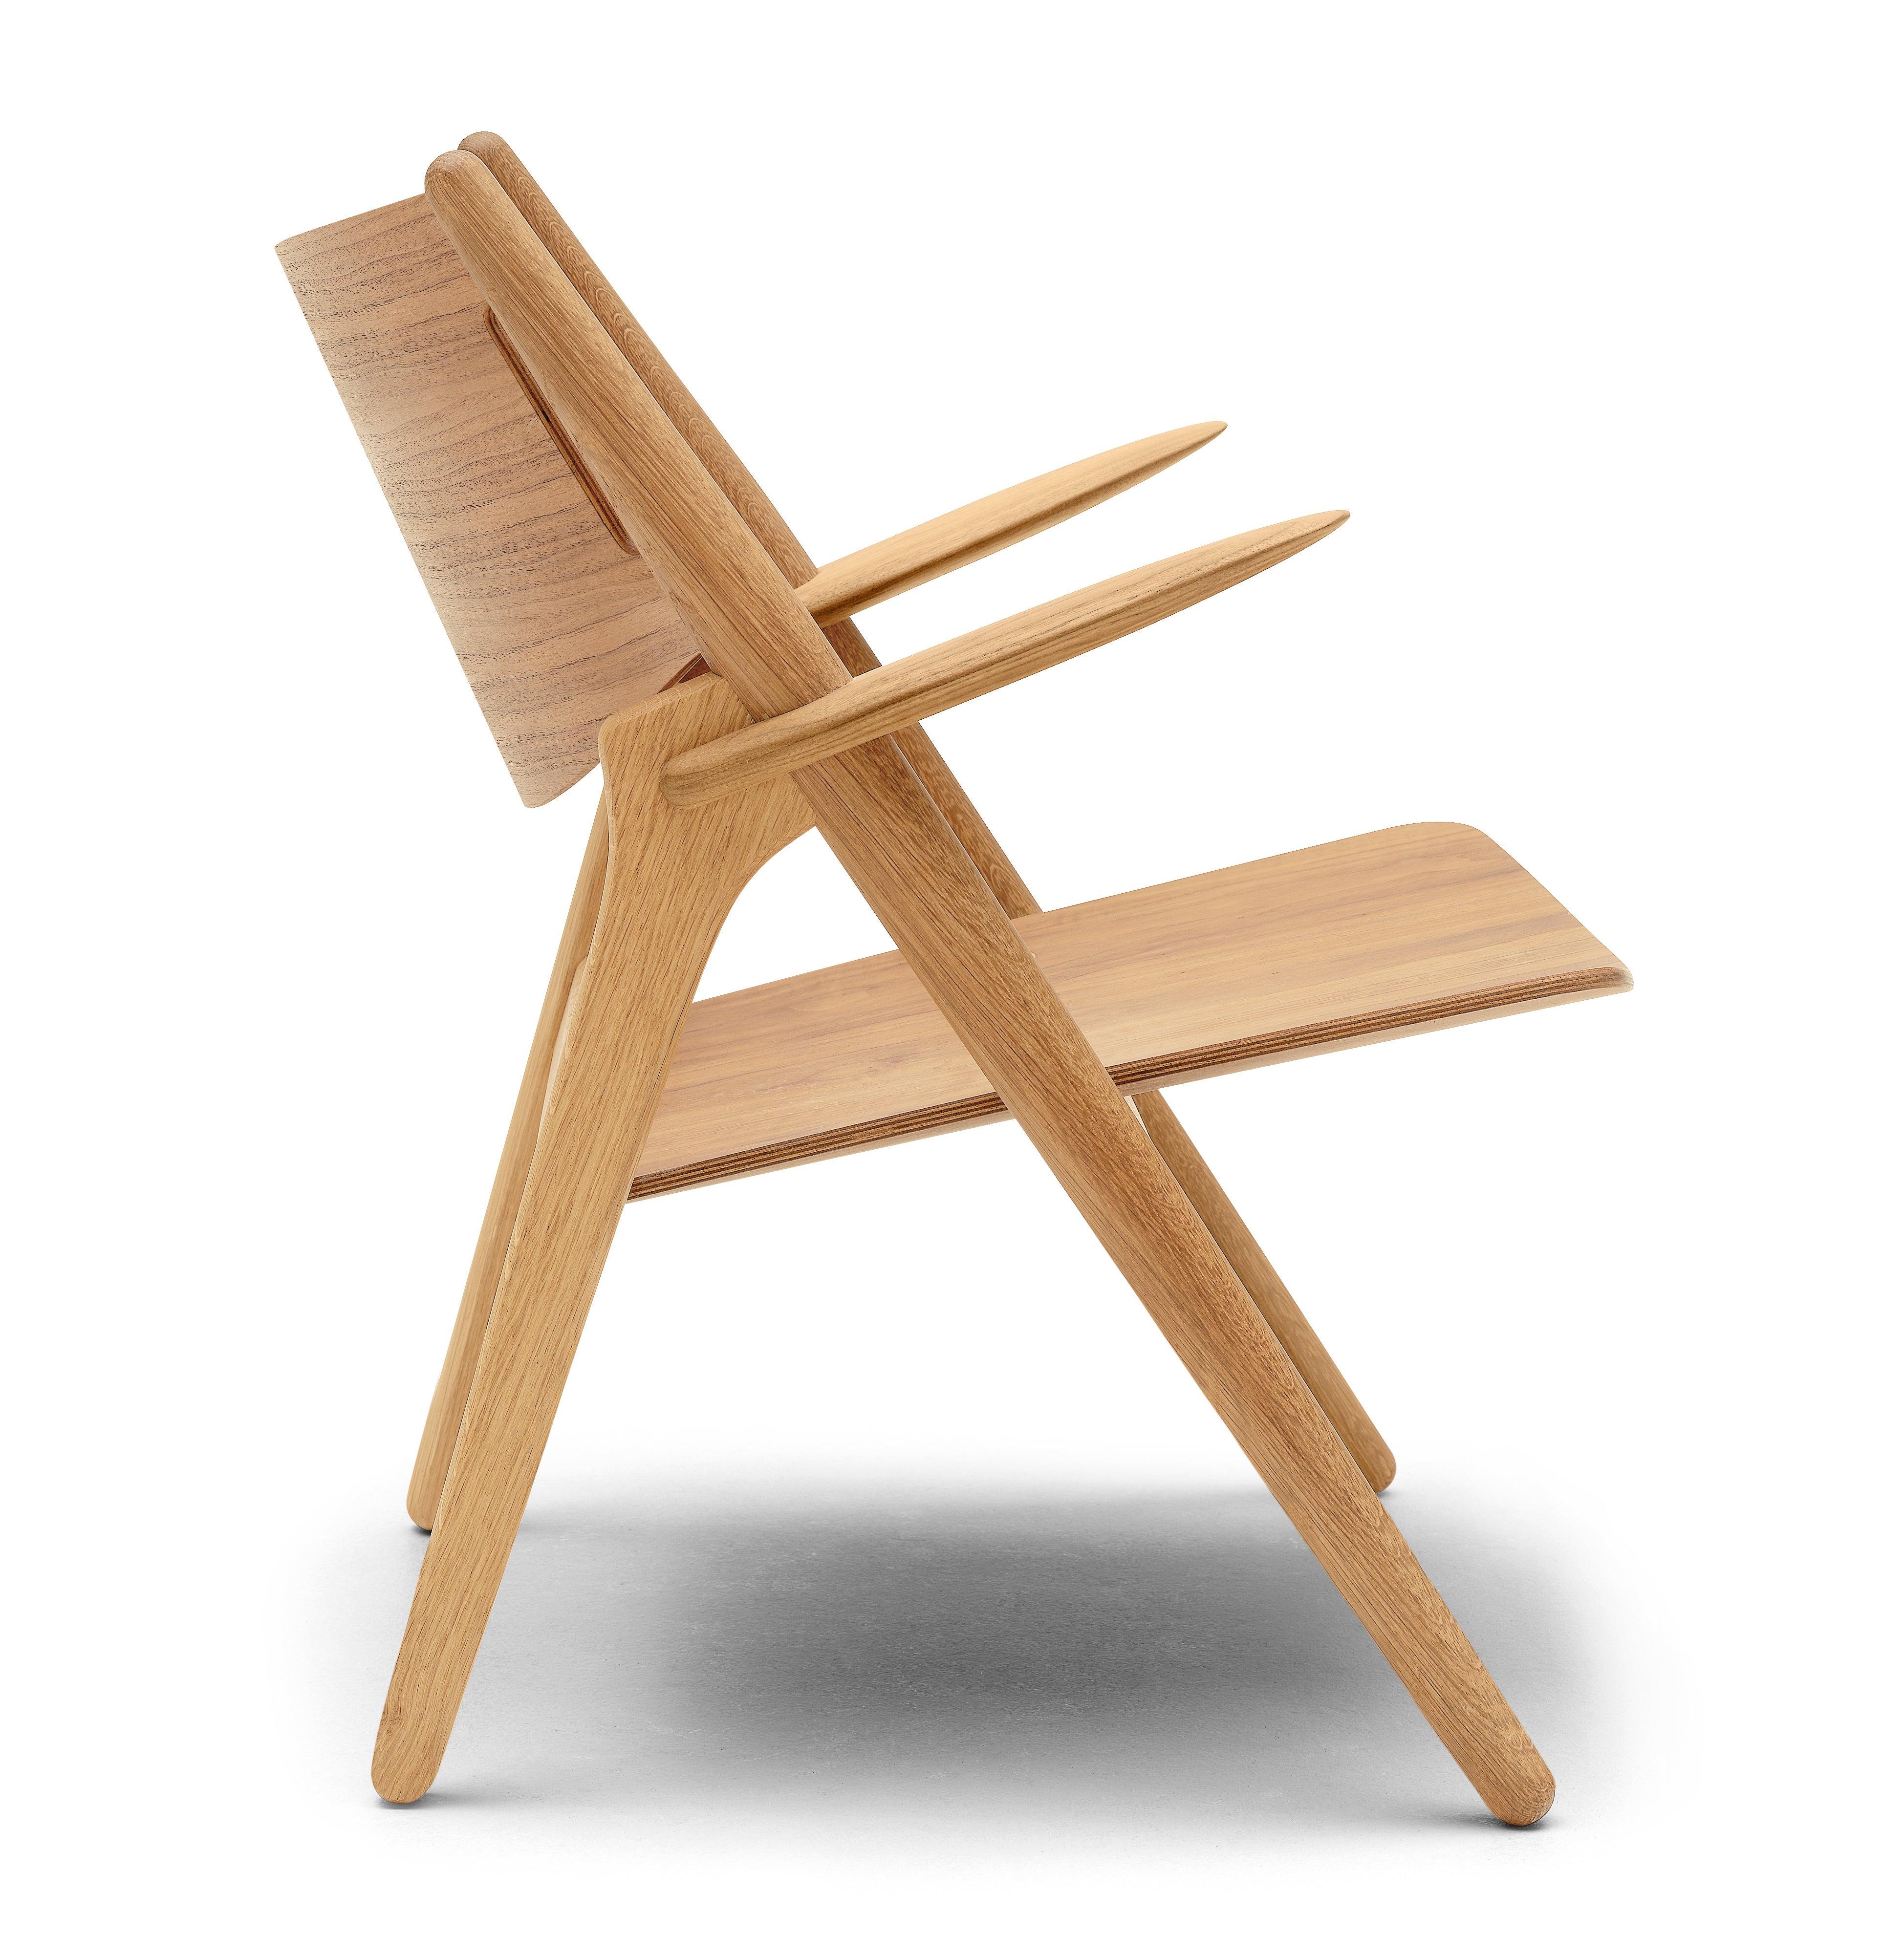 The CH28T lounge chair by Hans J. Wegner is very precise in its expression. It showcases Wegnerâ€™s dedication to finding the optimal balance of function and visually attractive form. Wegner attained an intriguing dynamic between the slender,